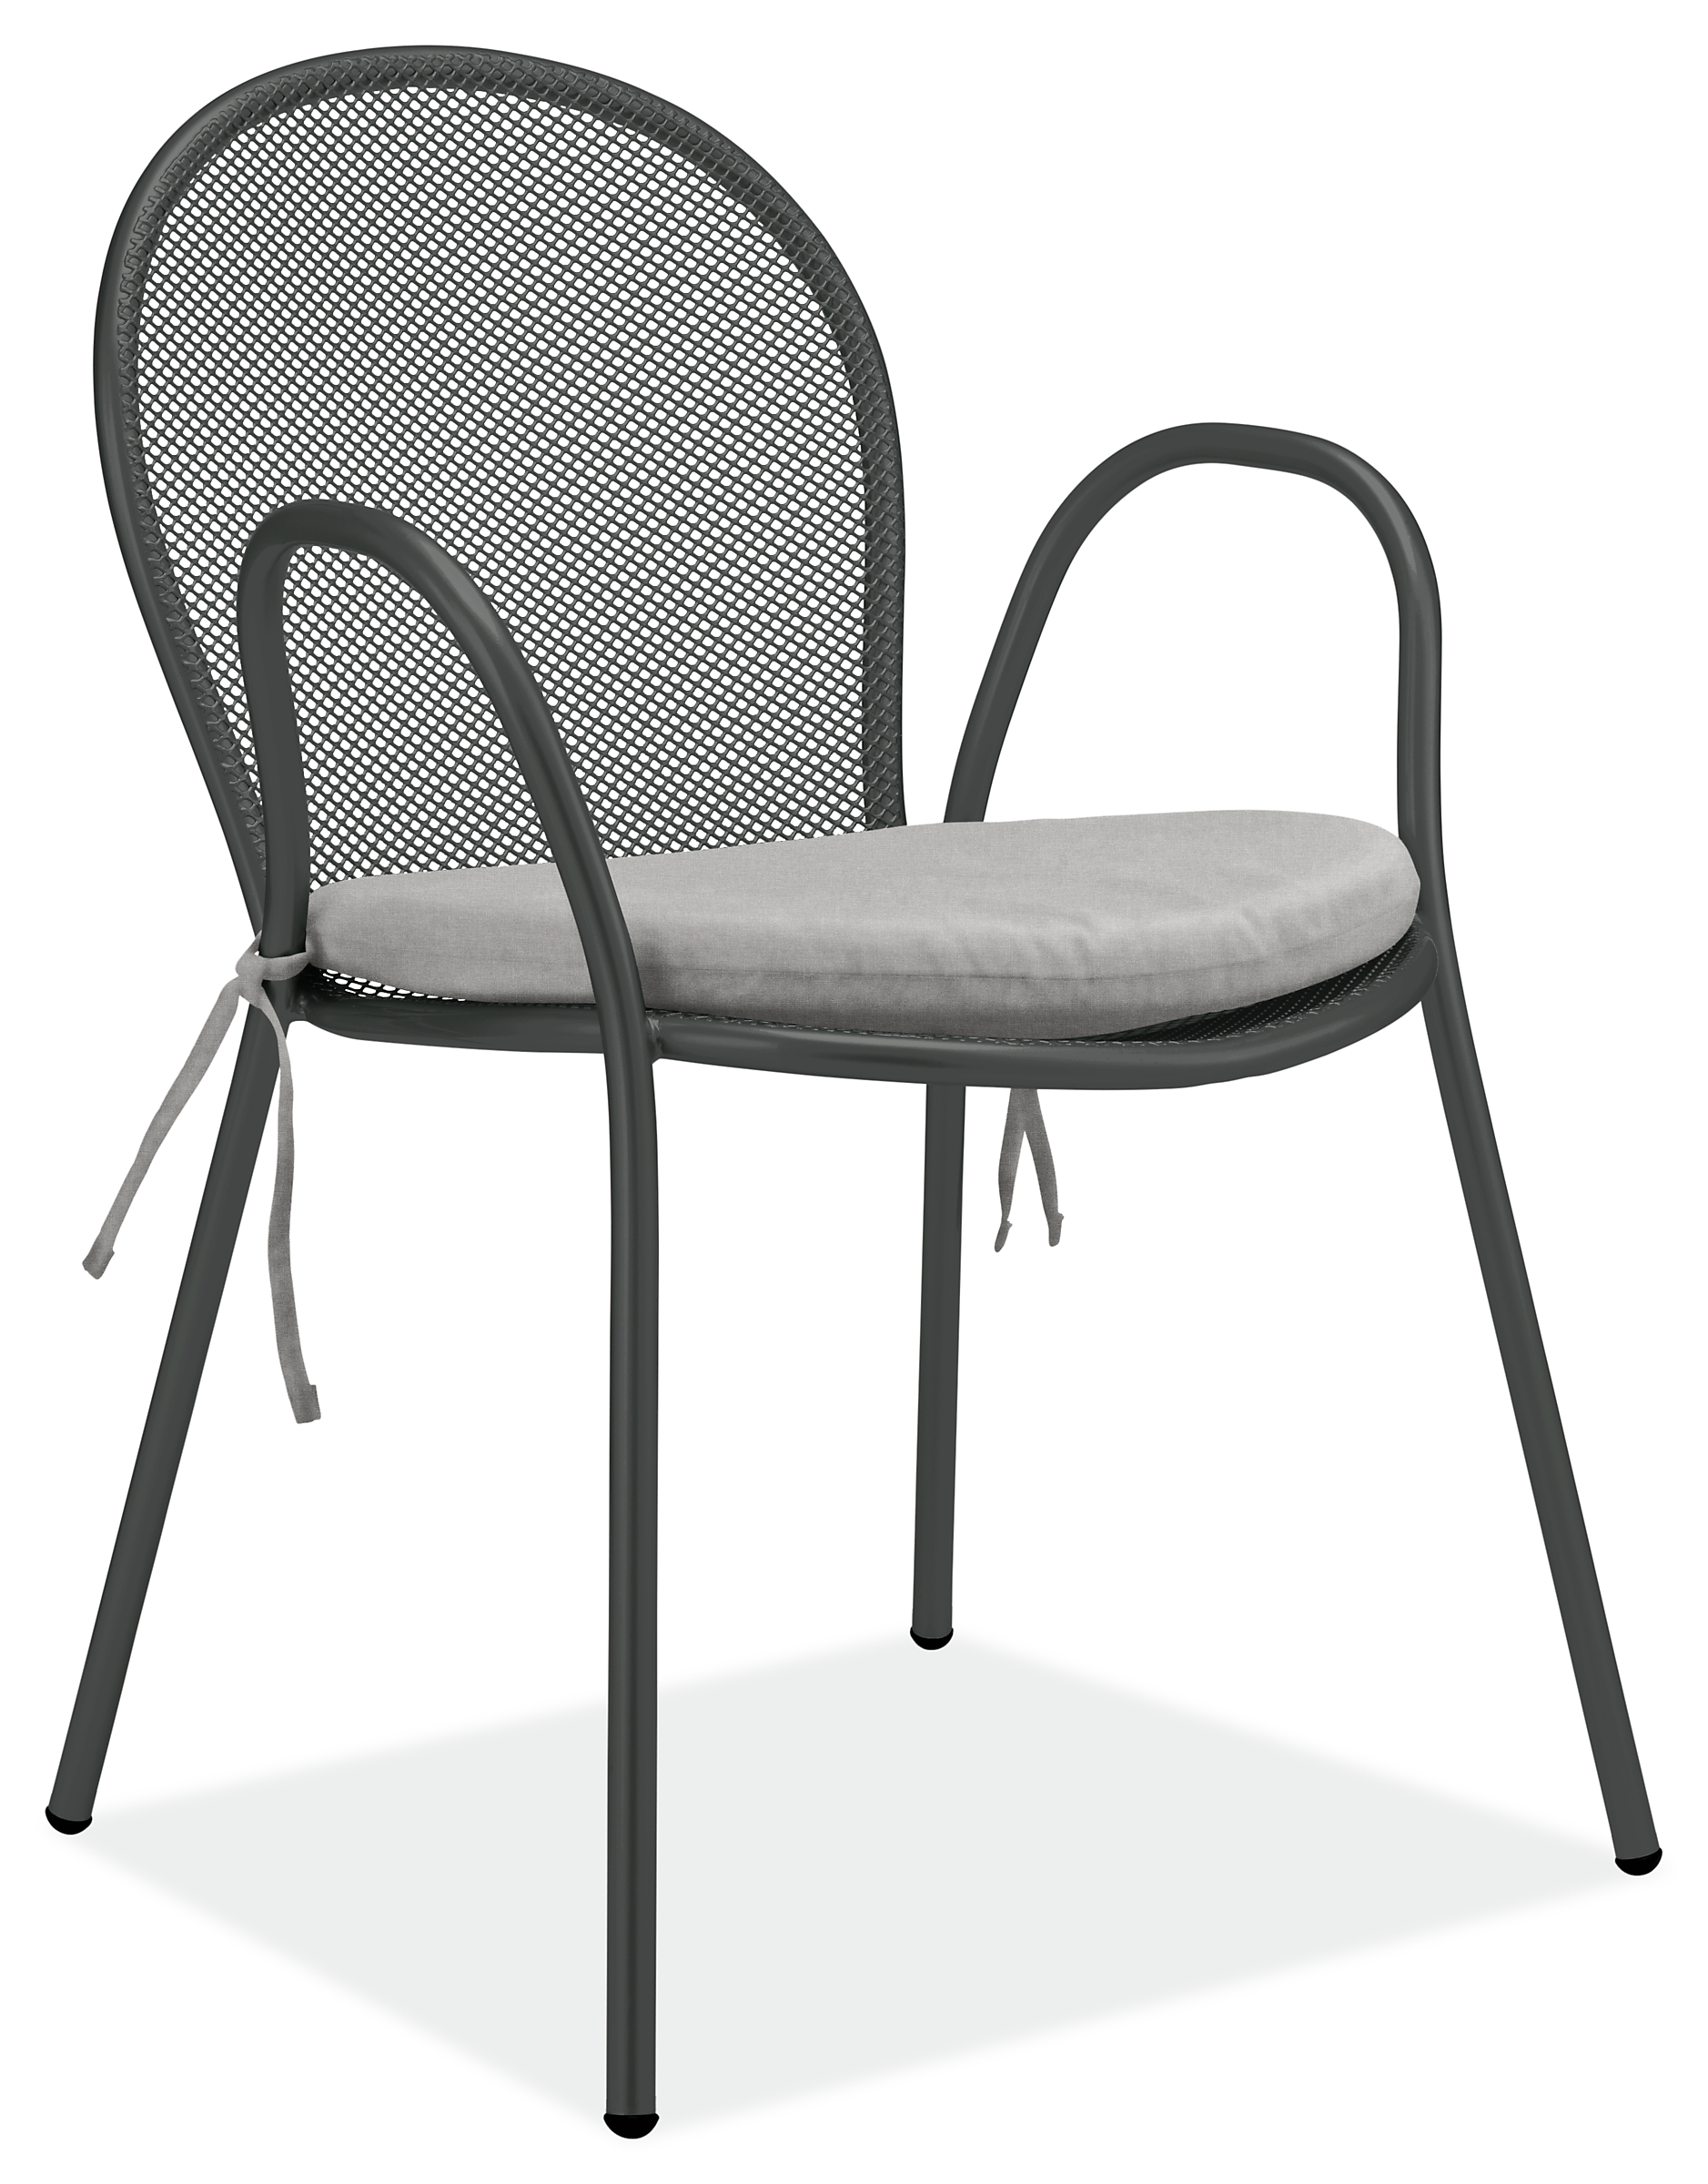 Rio Chair in Graphite with Cushion